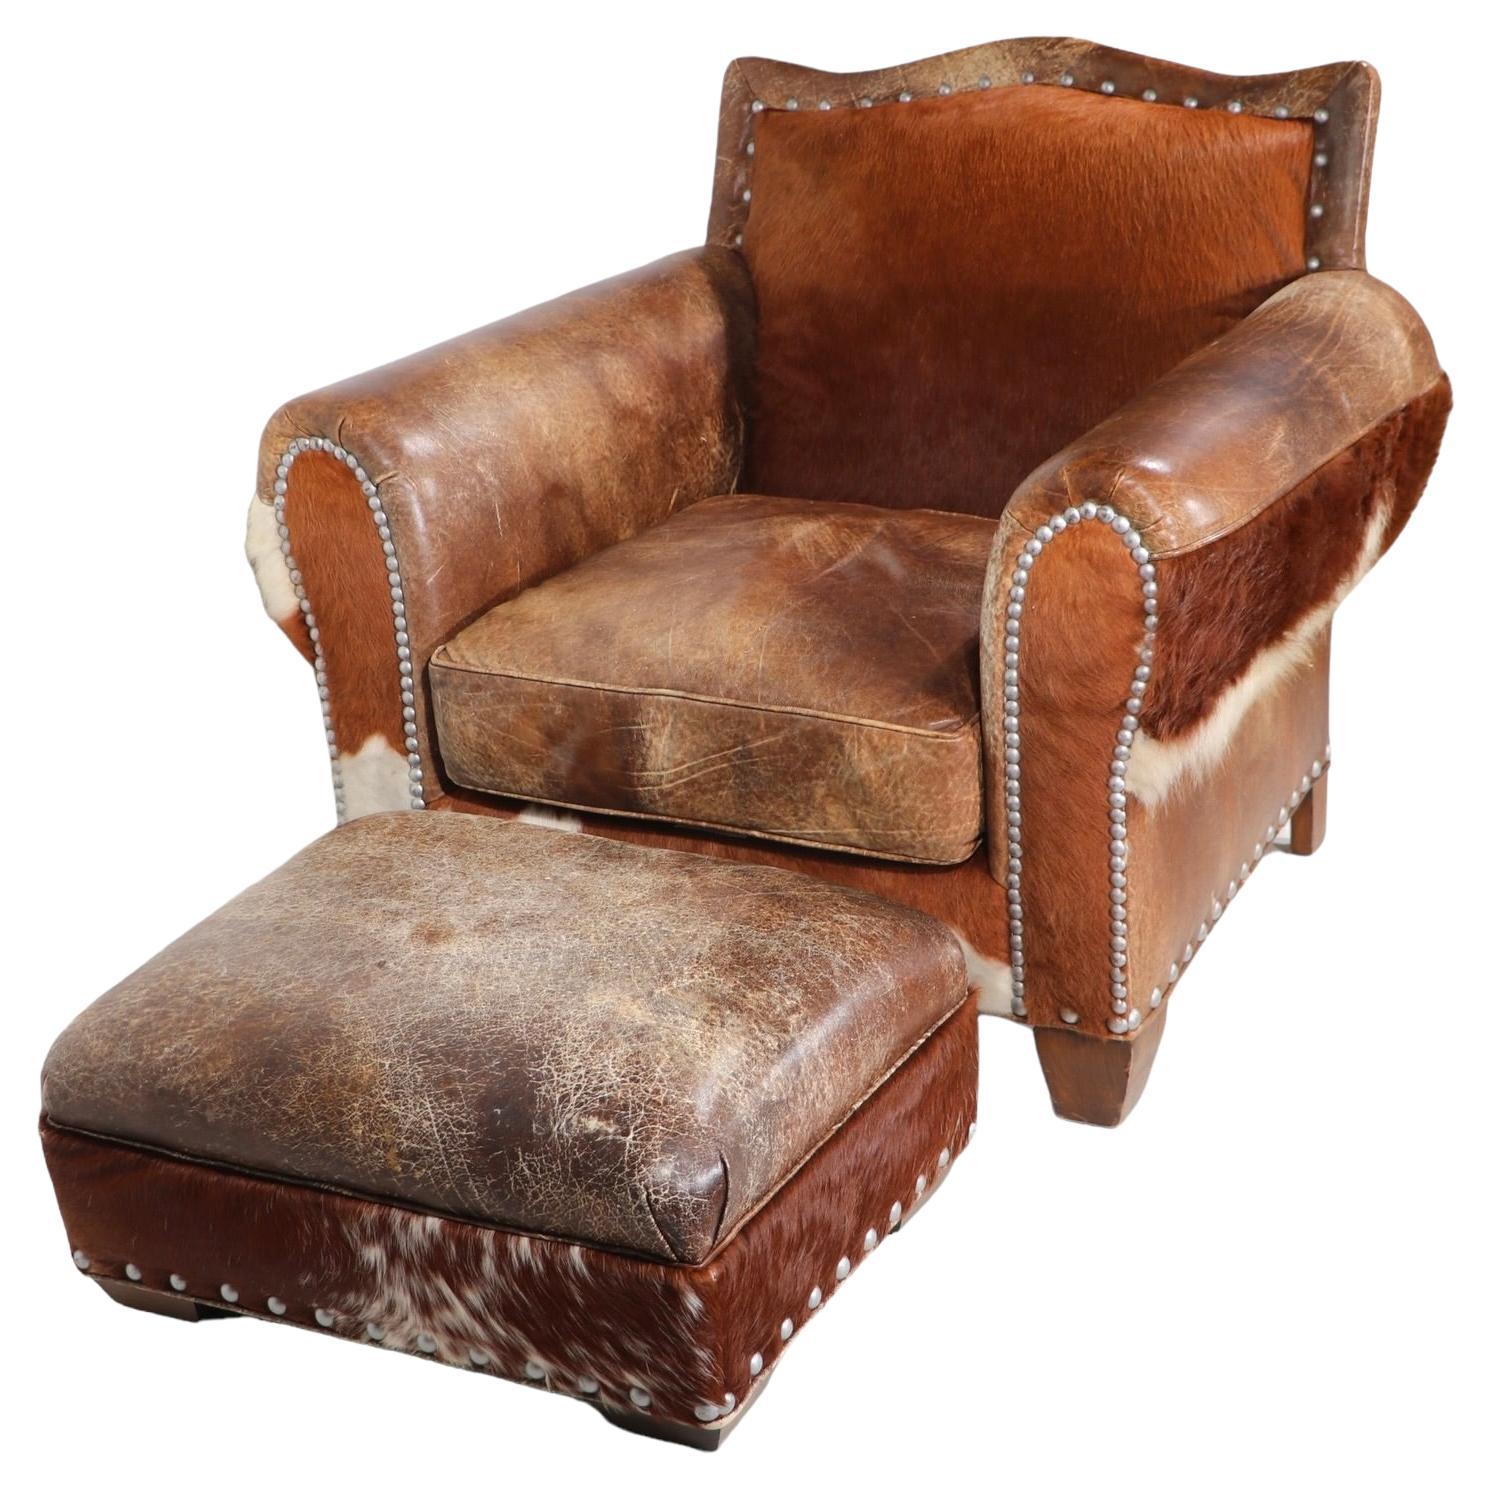 Exceptional Western style leather and  cow hide lounge chair and ottoman by noted American furniture company, Old Hickory Tannery. These pieces are in excellent, original, clean and ready to use condition, free of damage or repairs. 
 Chair